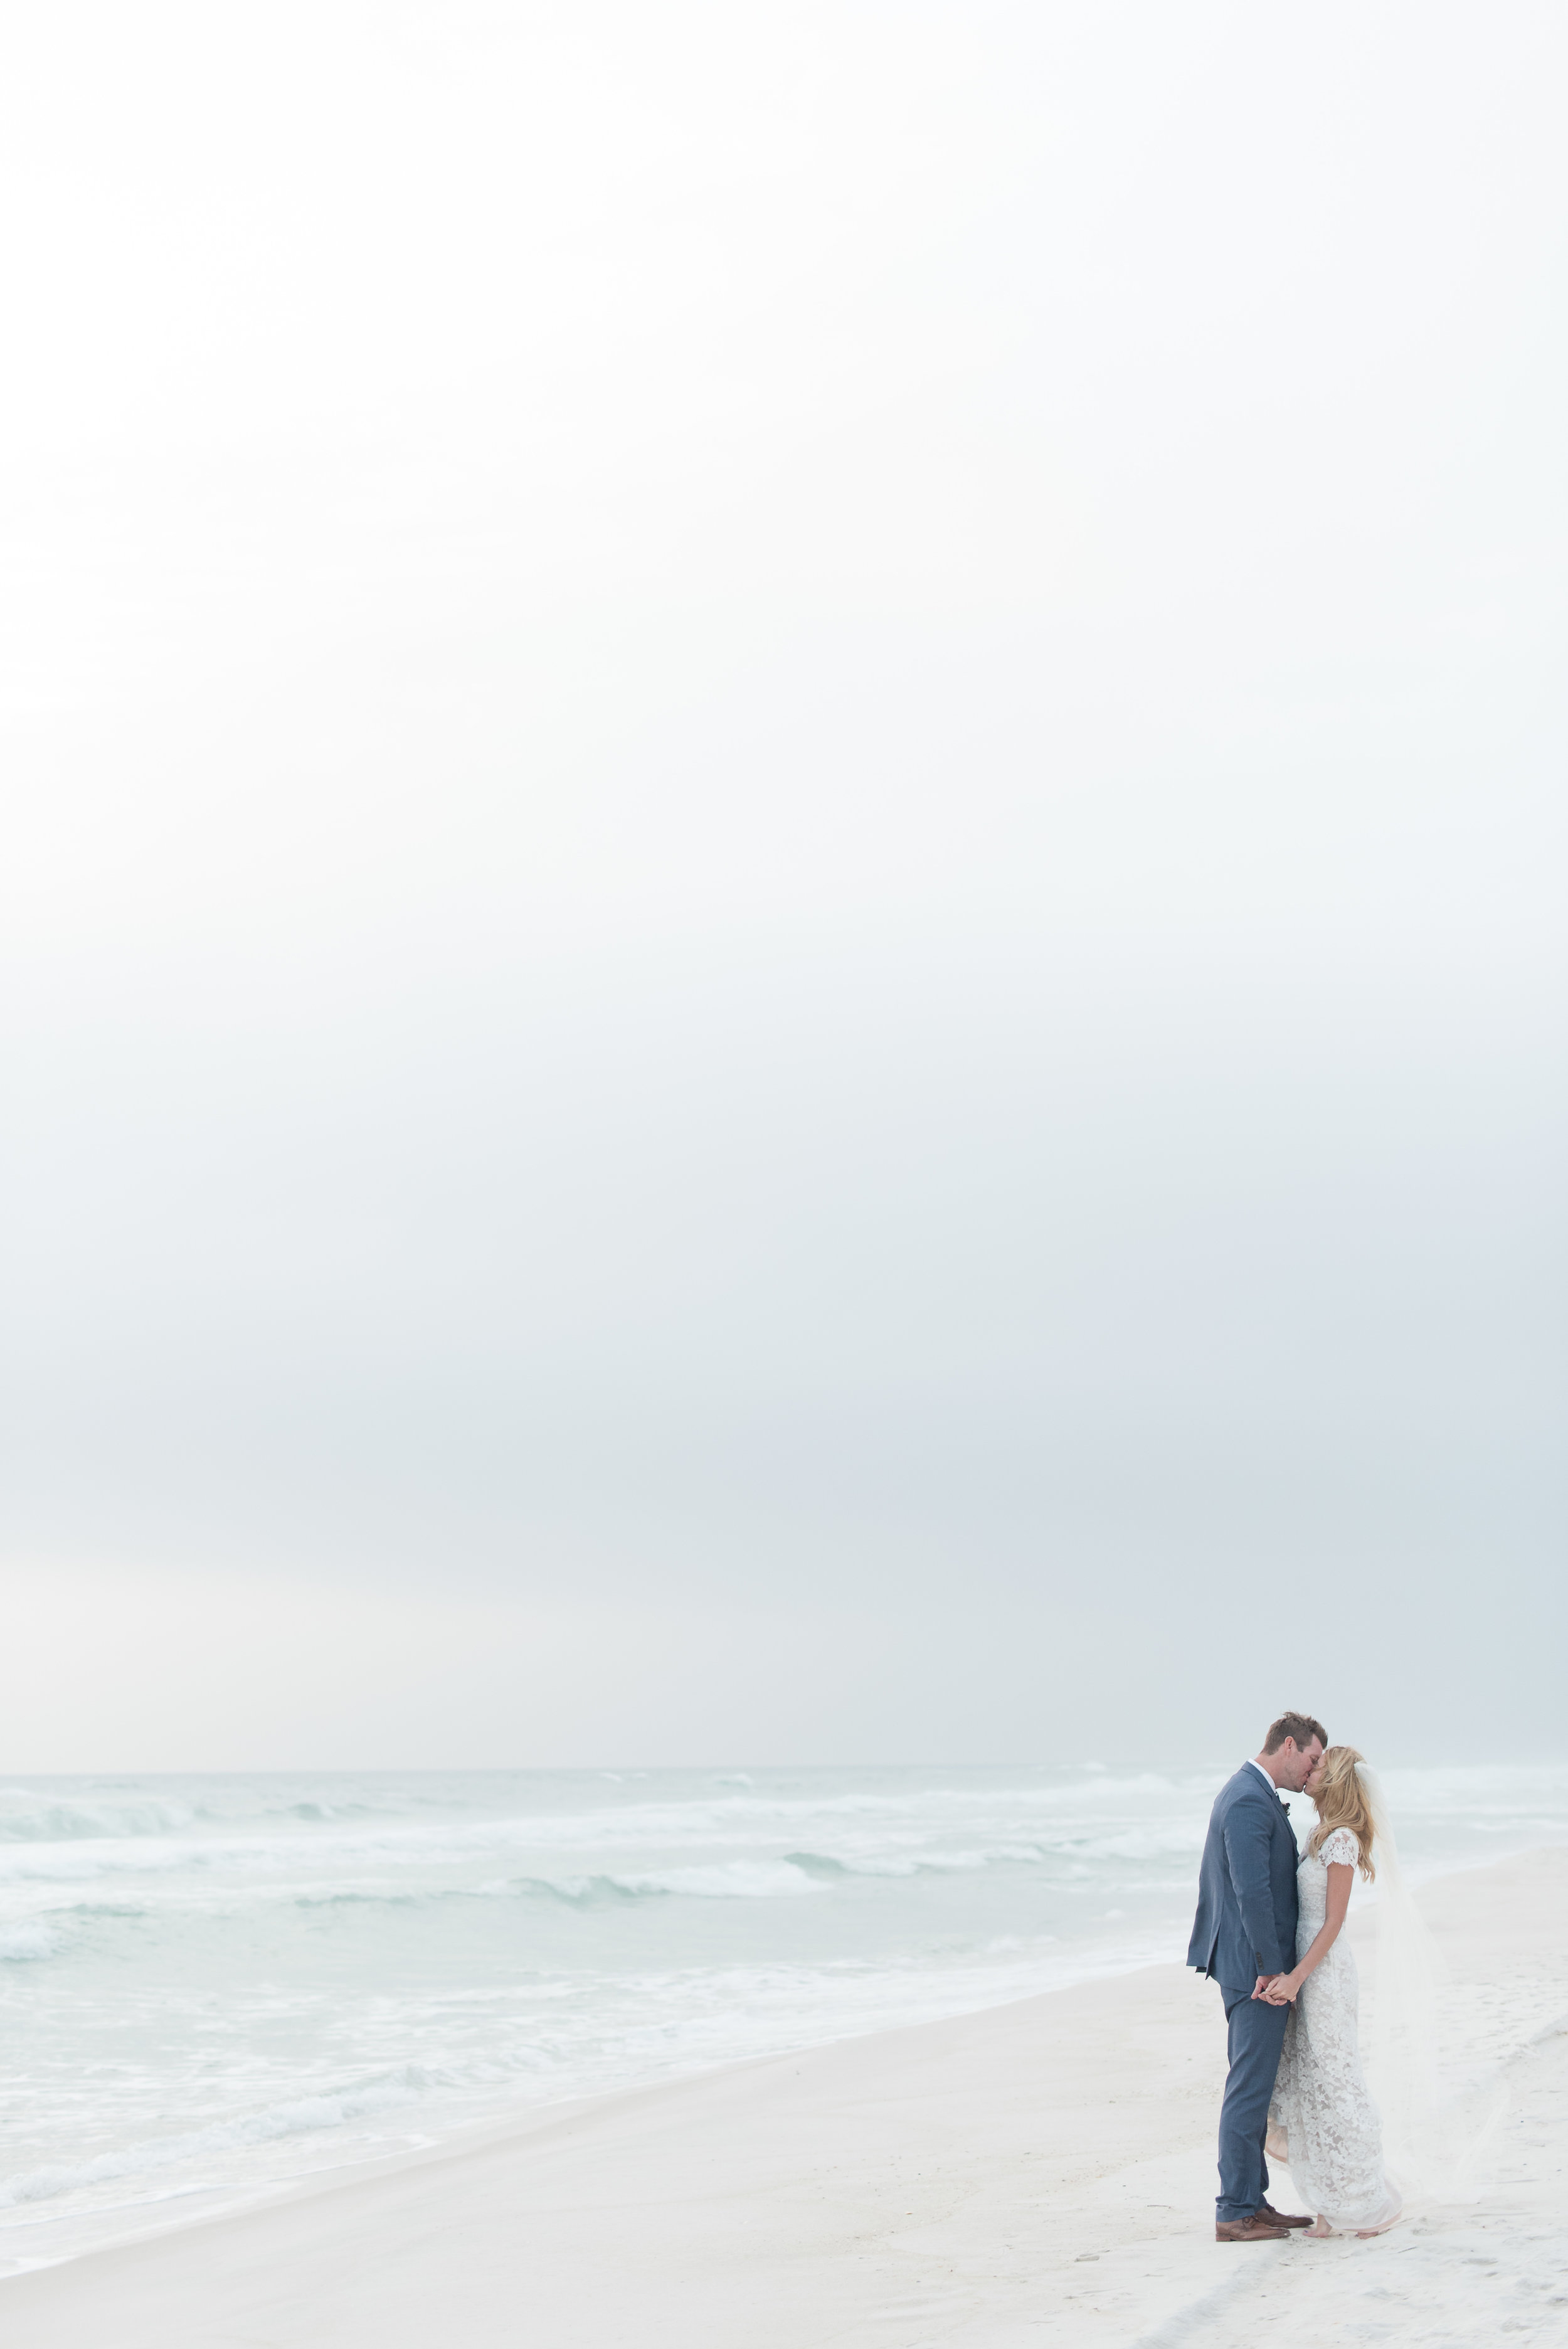 Bride and groom portrait in Rosemary Beach, Florida.